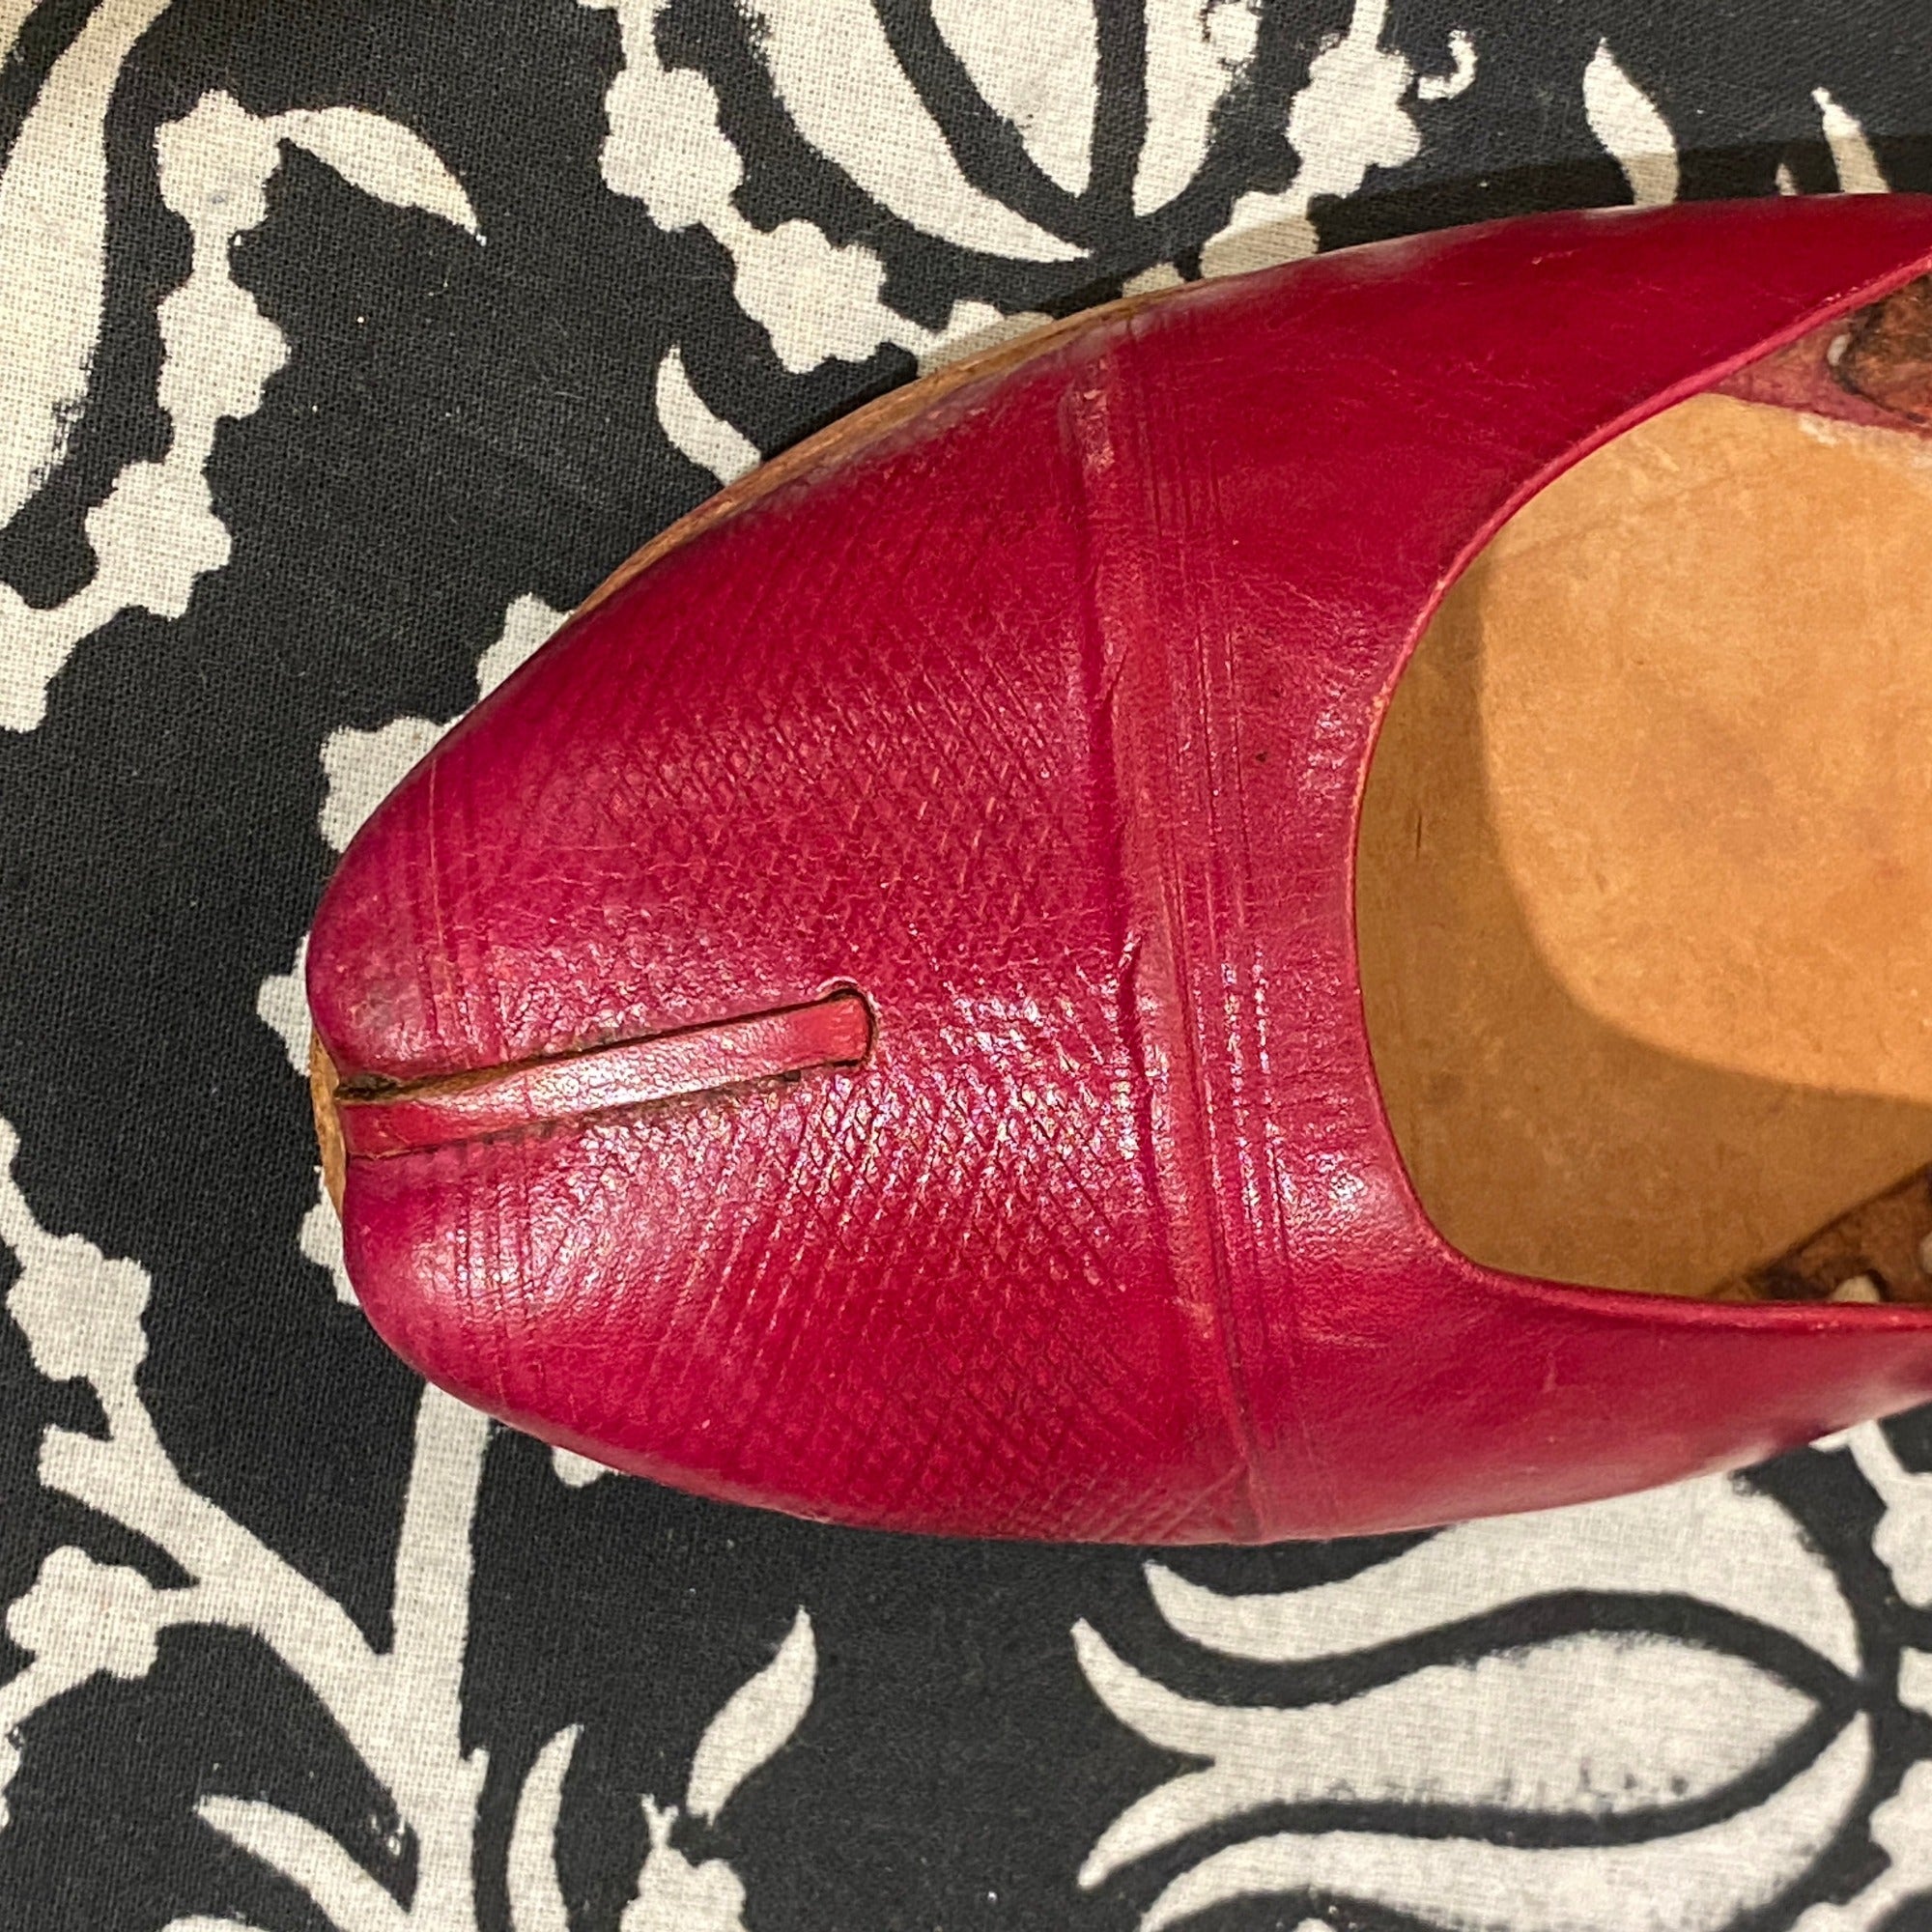 Handmade leather shoes in many colors - Vintage India NYC